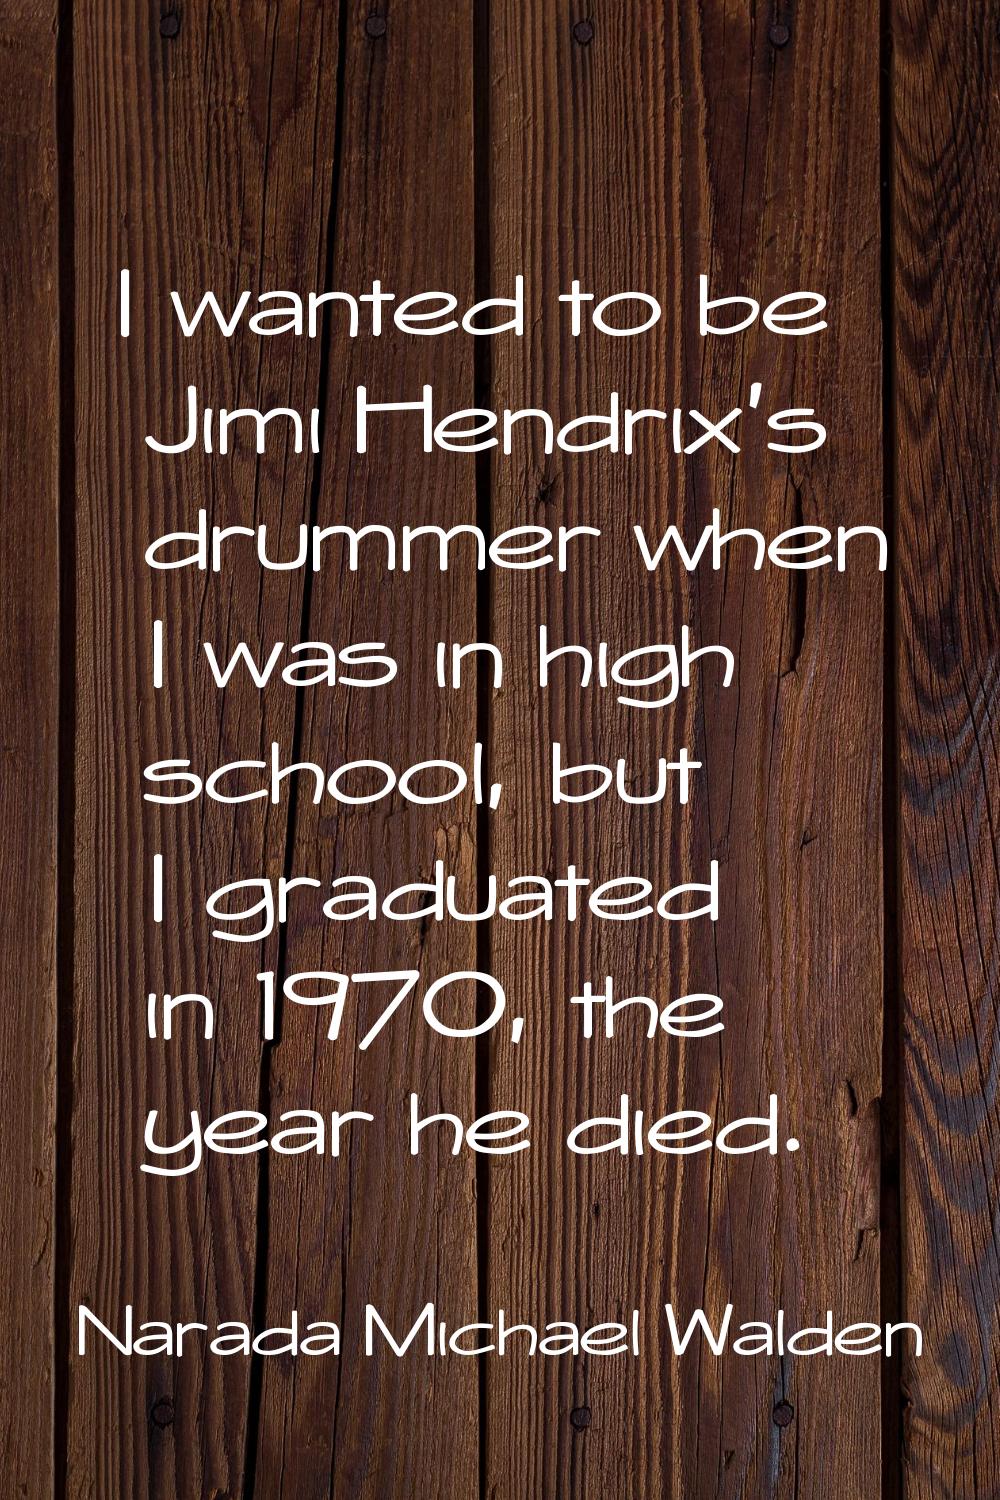 I wanted to be Jimi Hendrix's drummer when I was in high school, but I graduated in 1970, the year 